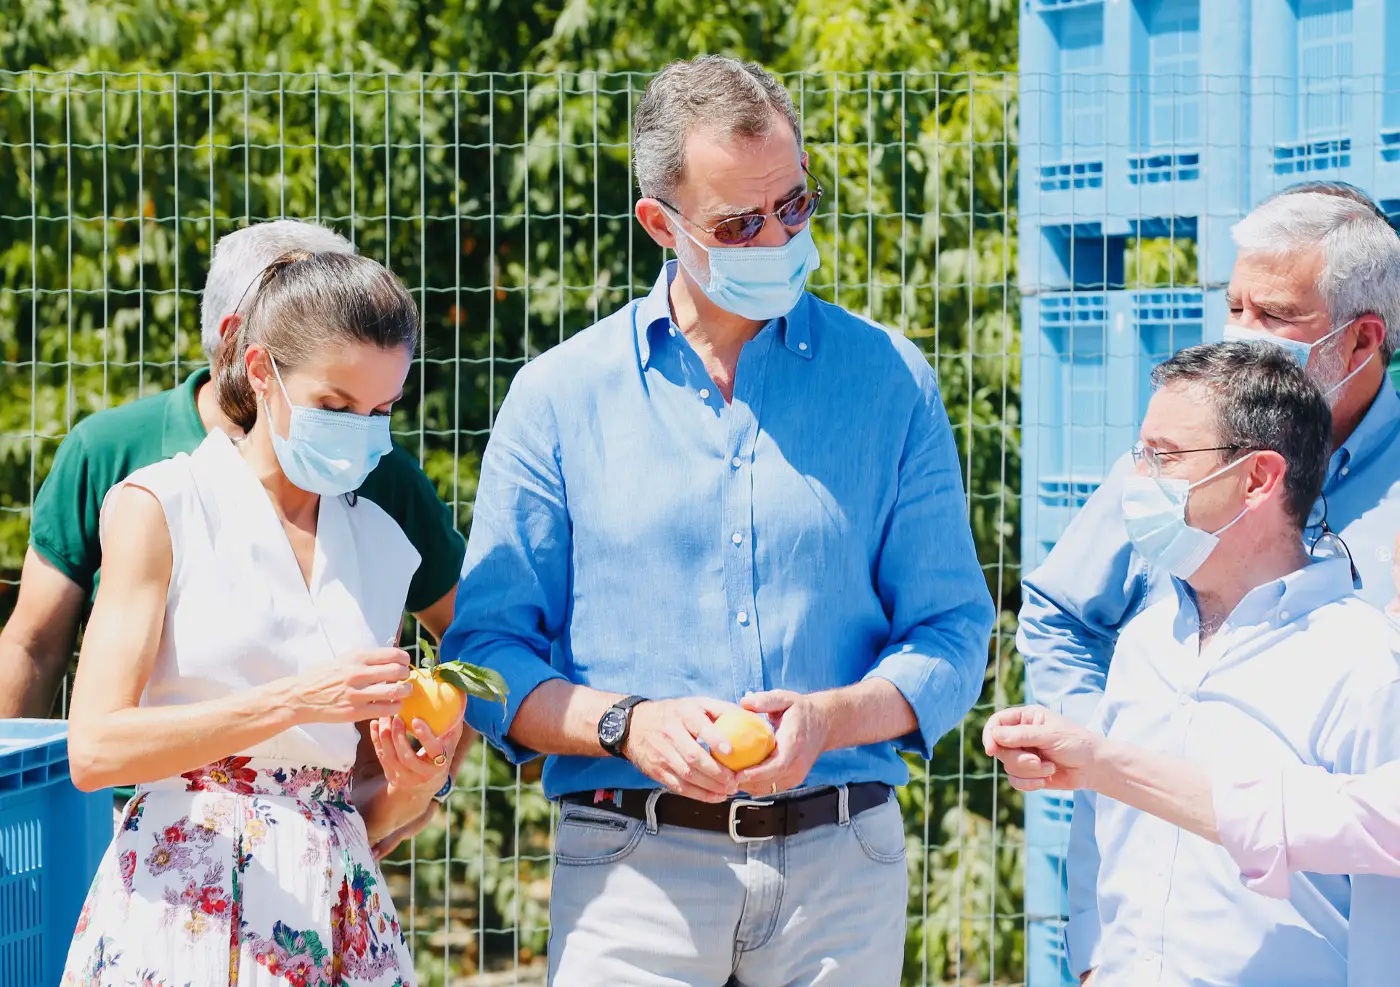 King Felipe and Queen Letizia of Spain visited La Carrichosa during a Cieza and Murcia tour